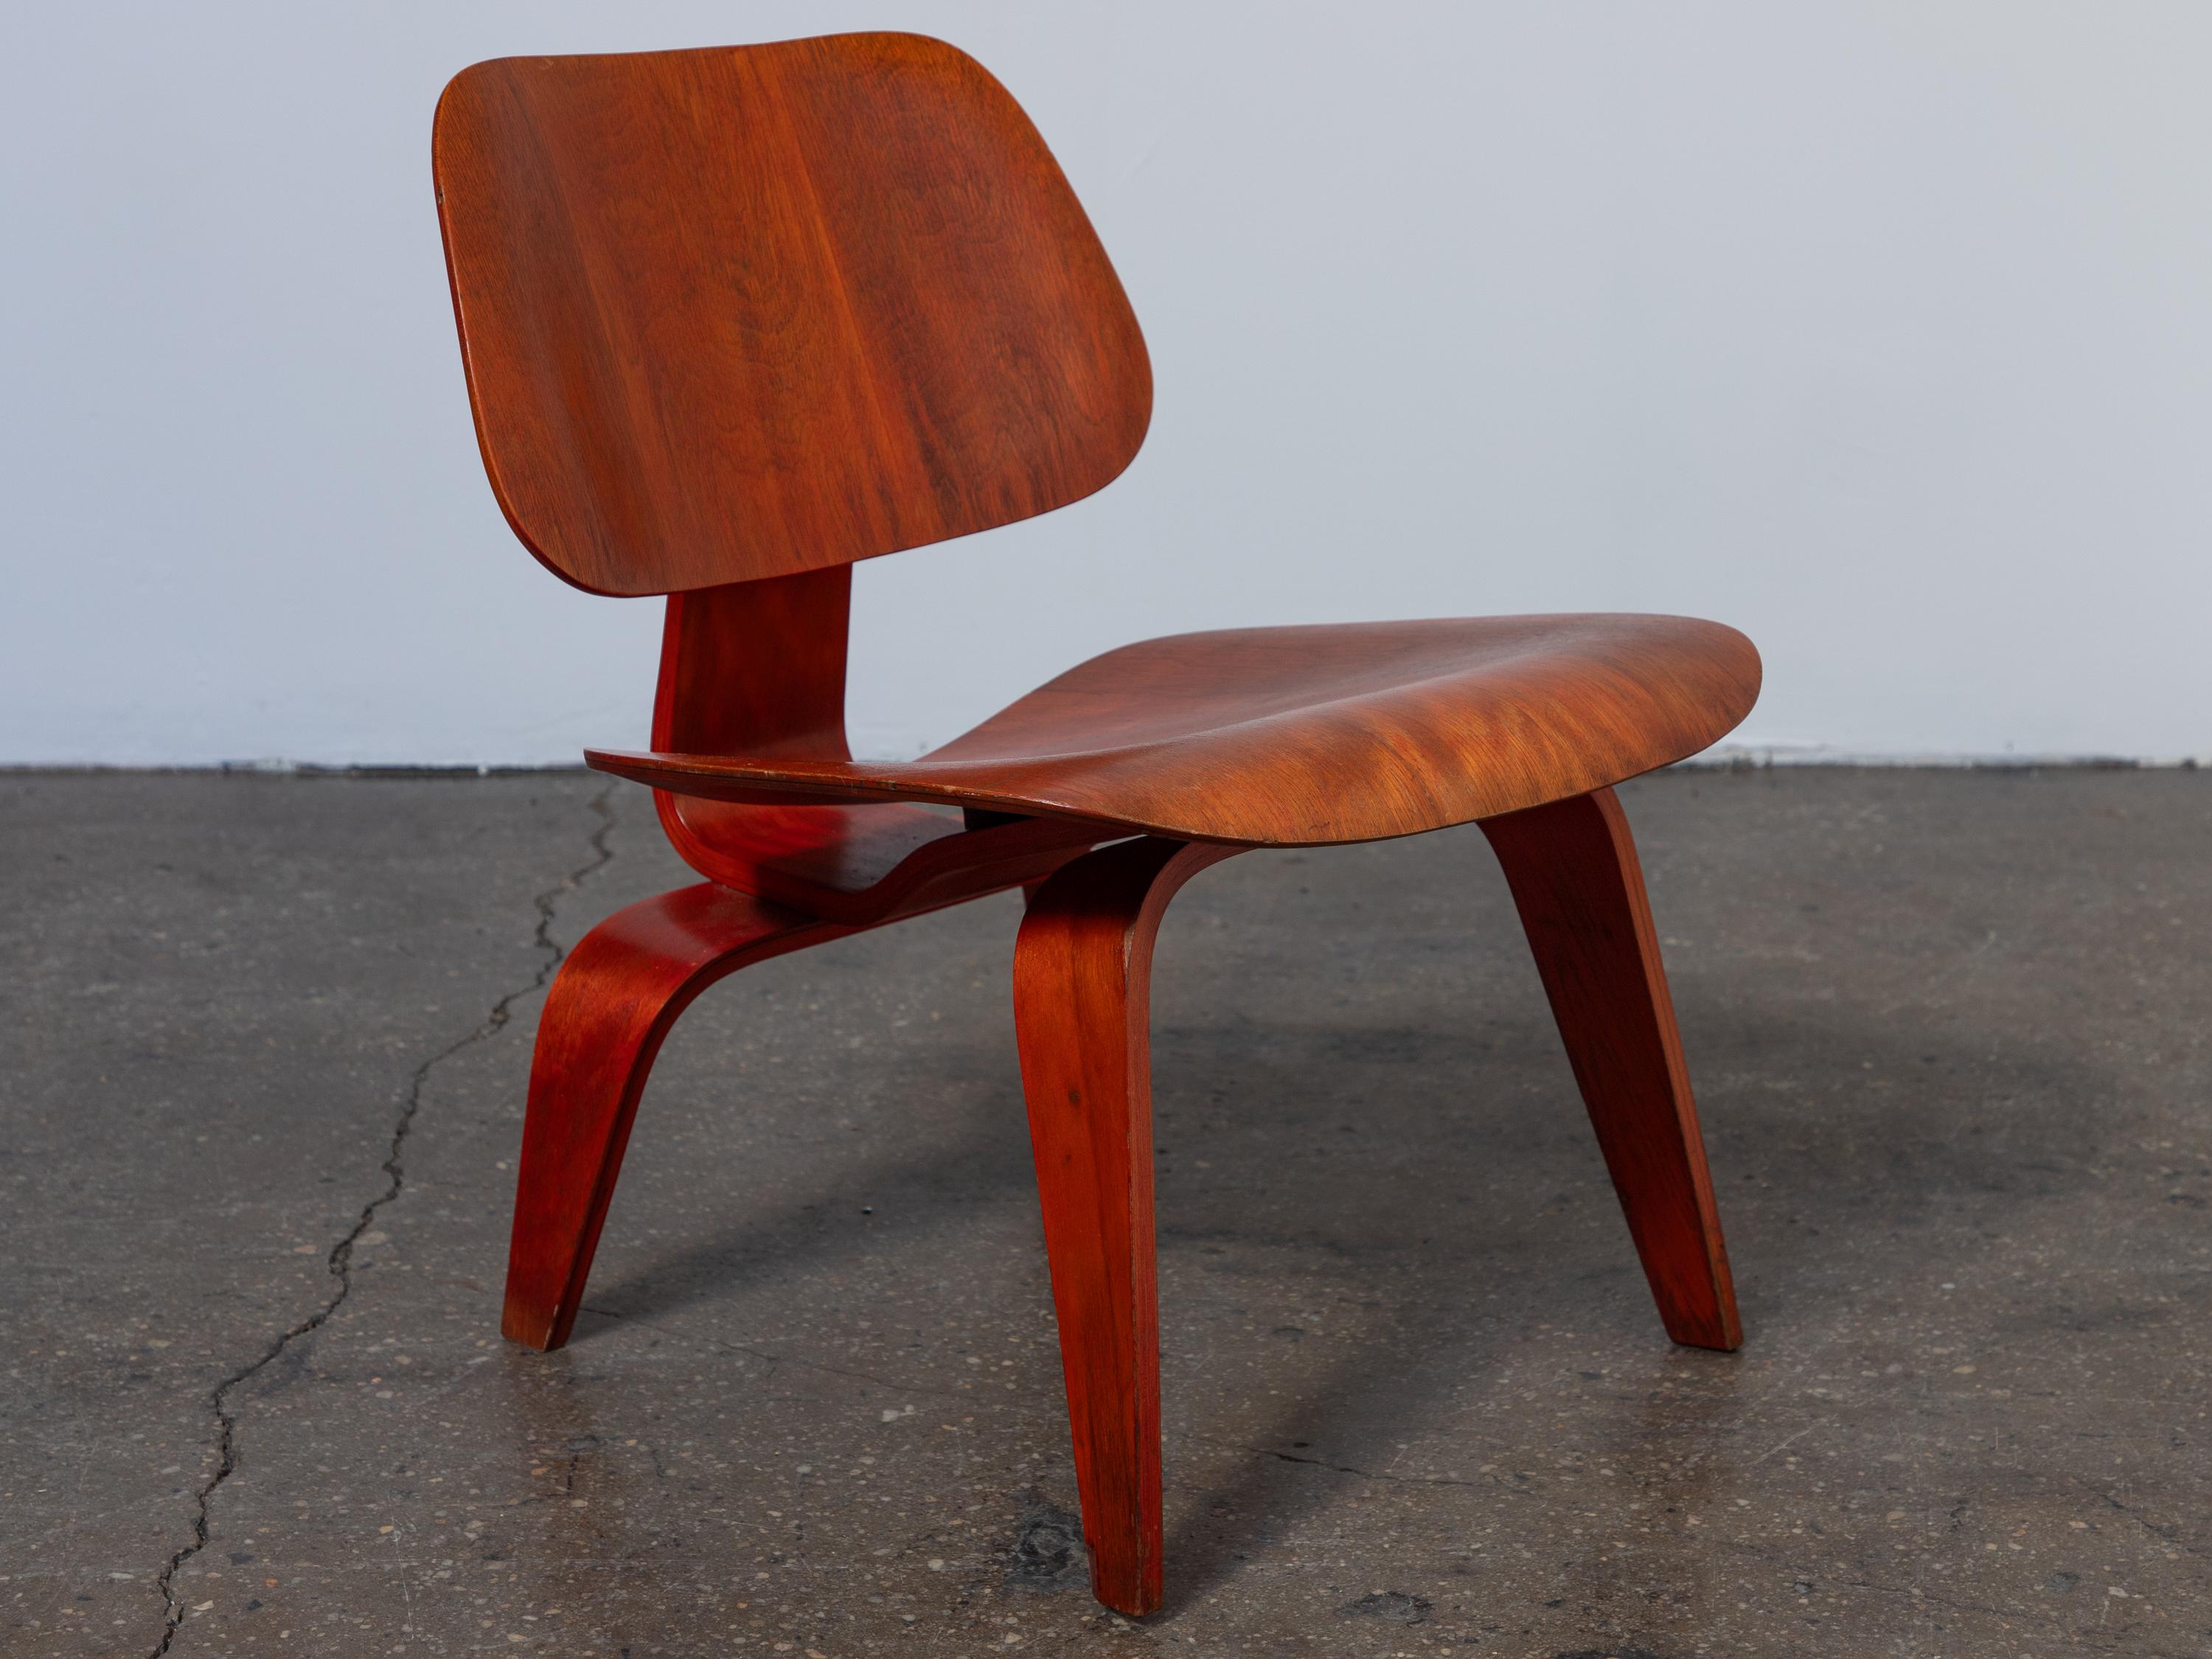 Dyed Eames Evans Red Aniline Dye LCW Lounge Chairs - Matched Pair   For Sale